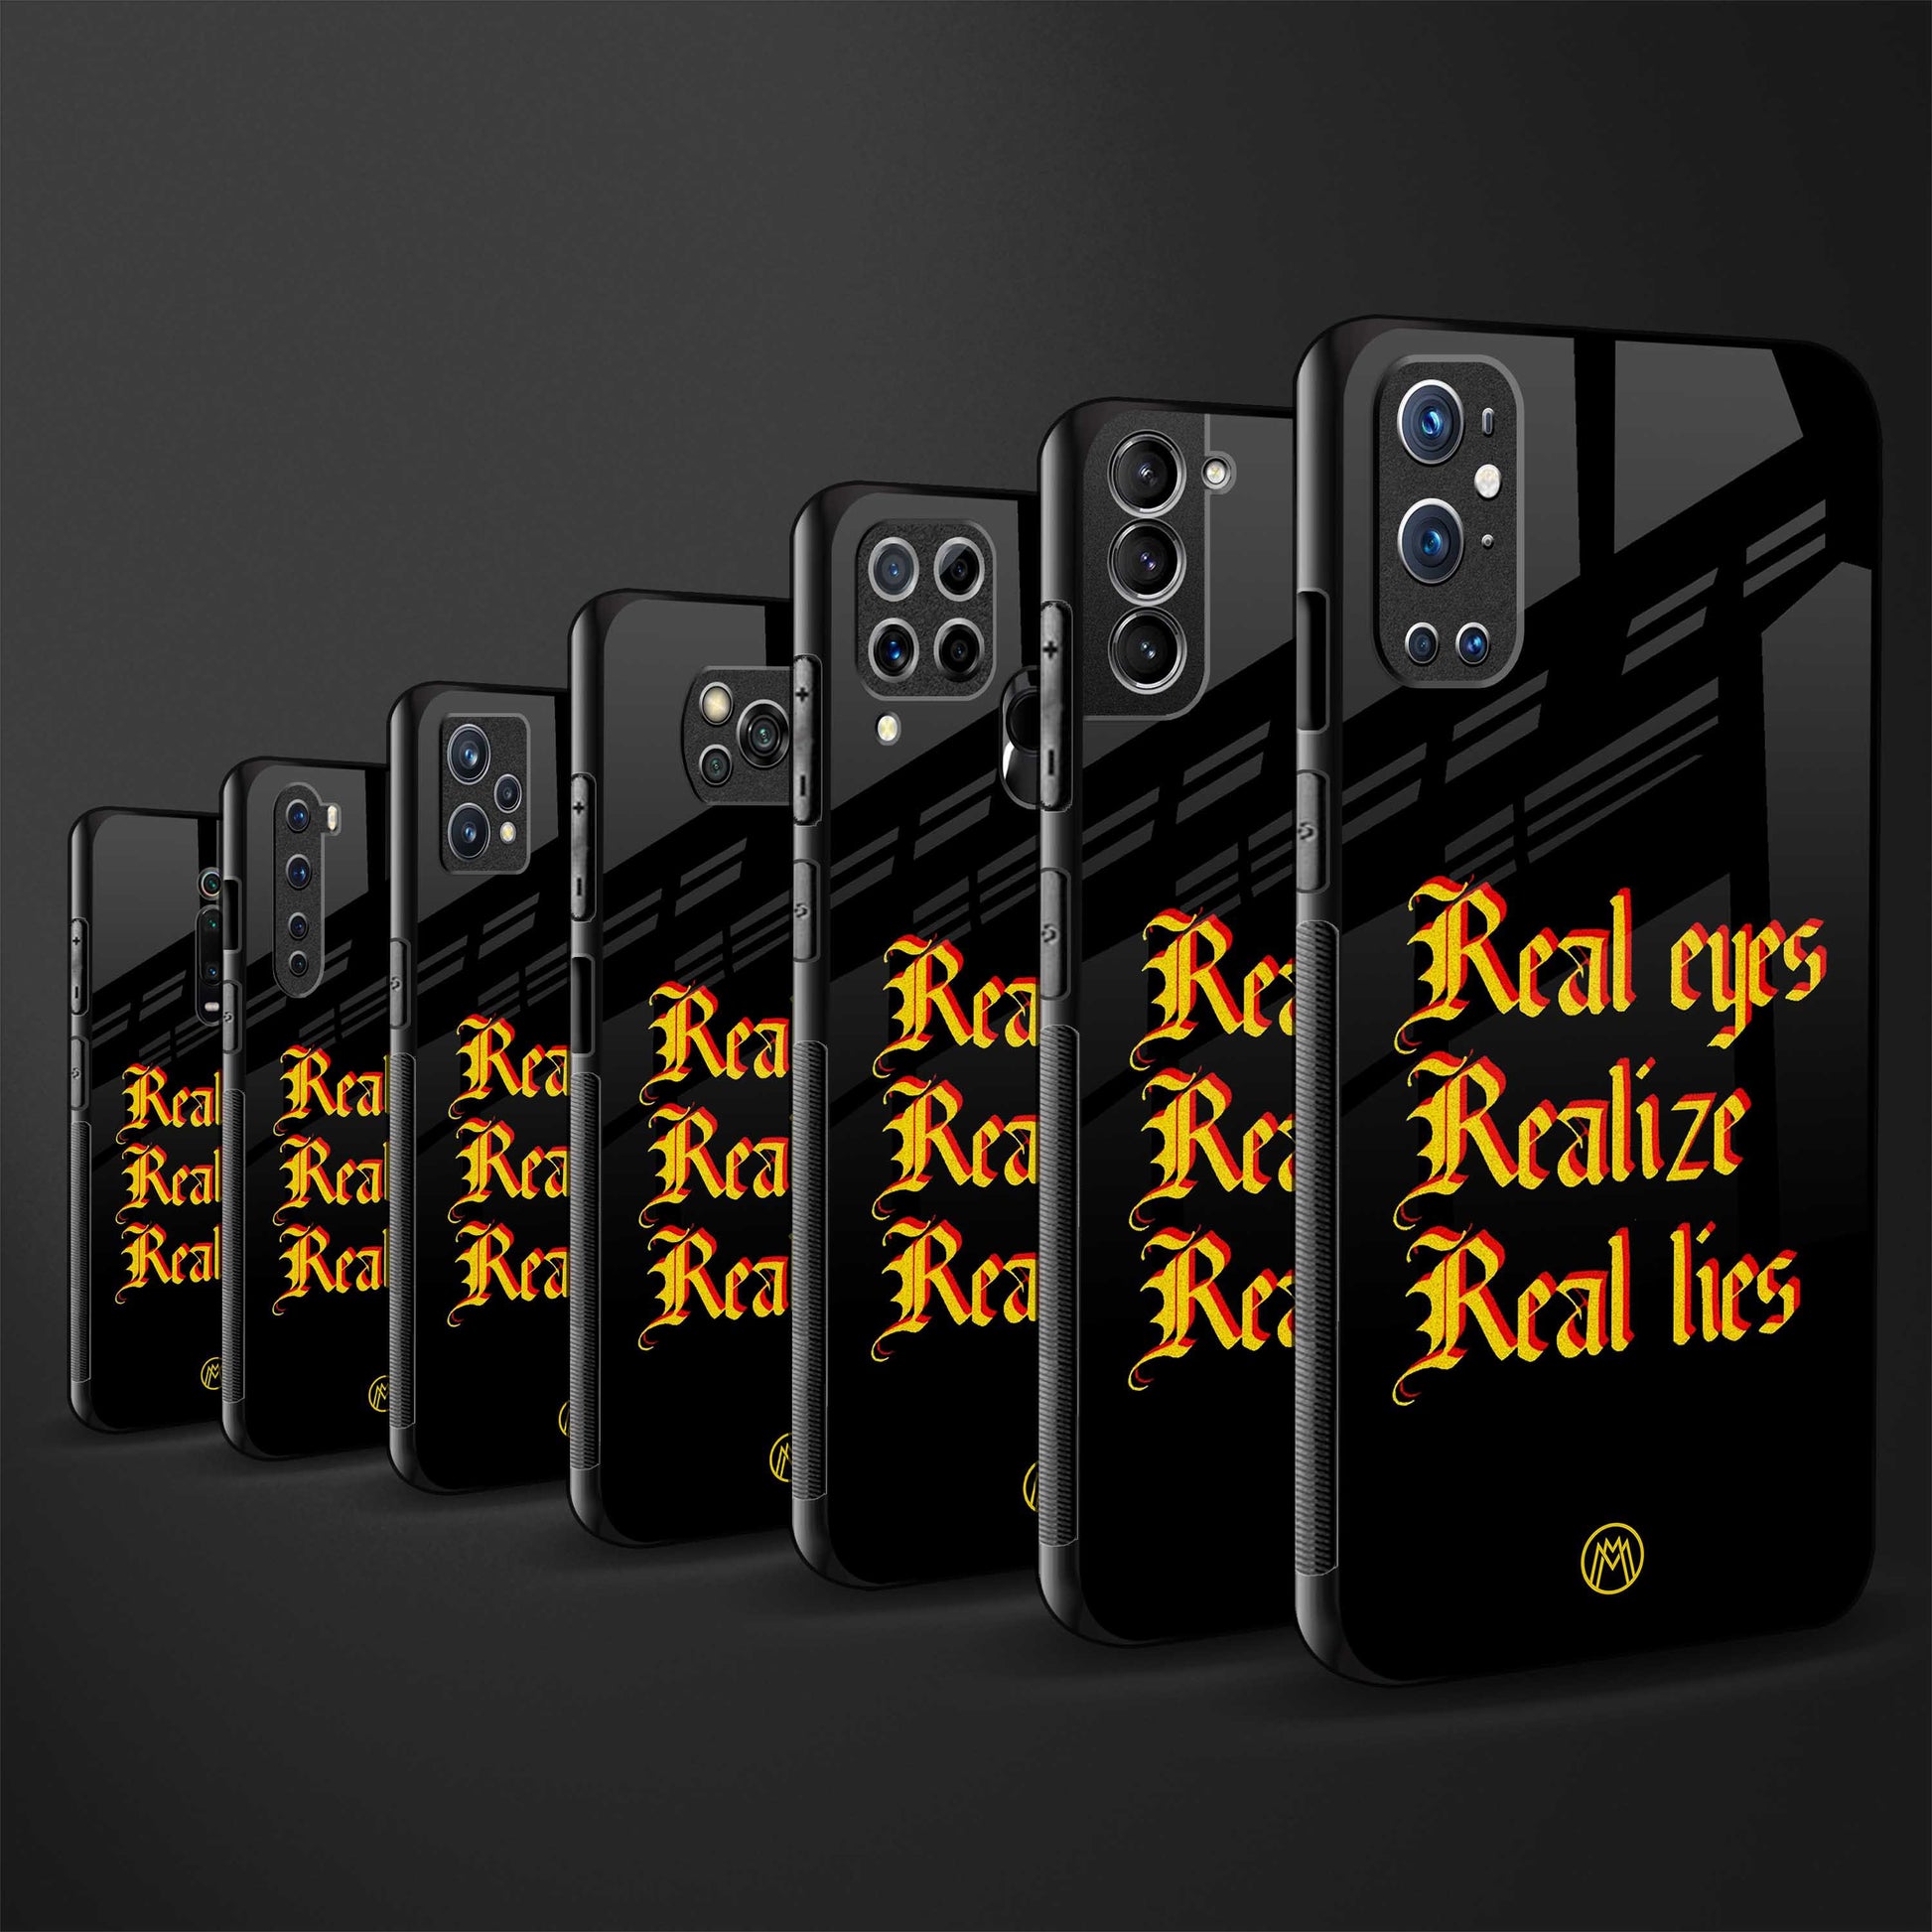 real eyes realize real lies quote glass case for oppo a7 image-3